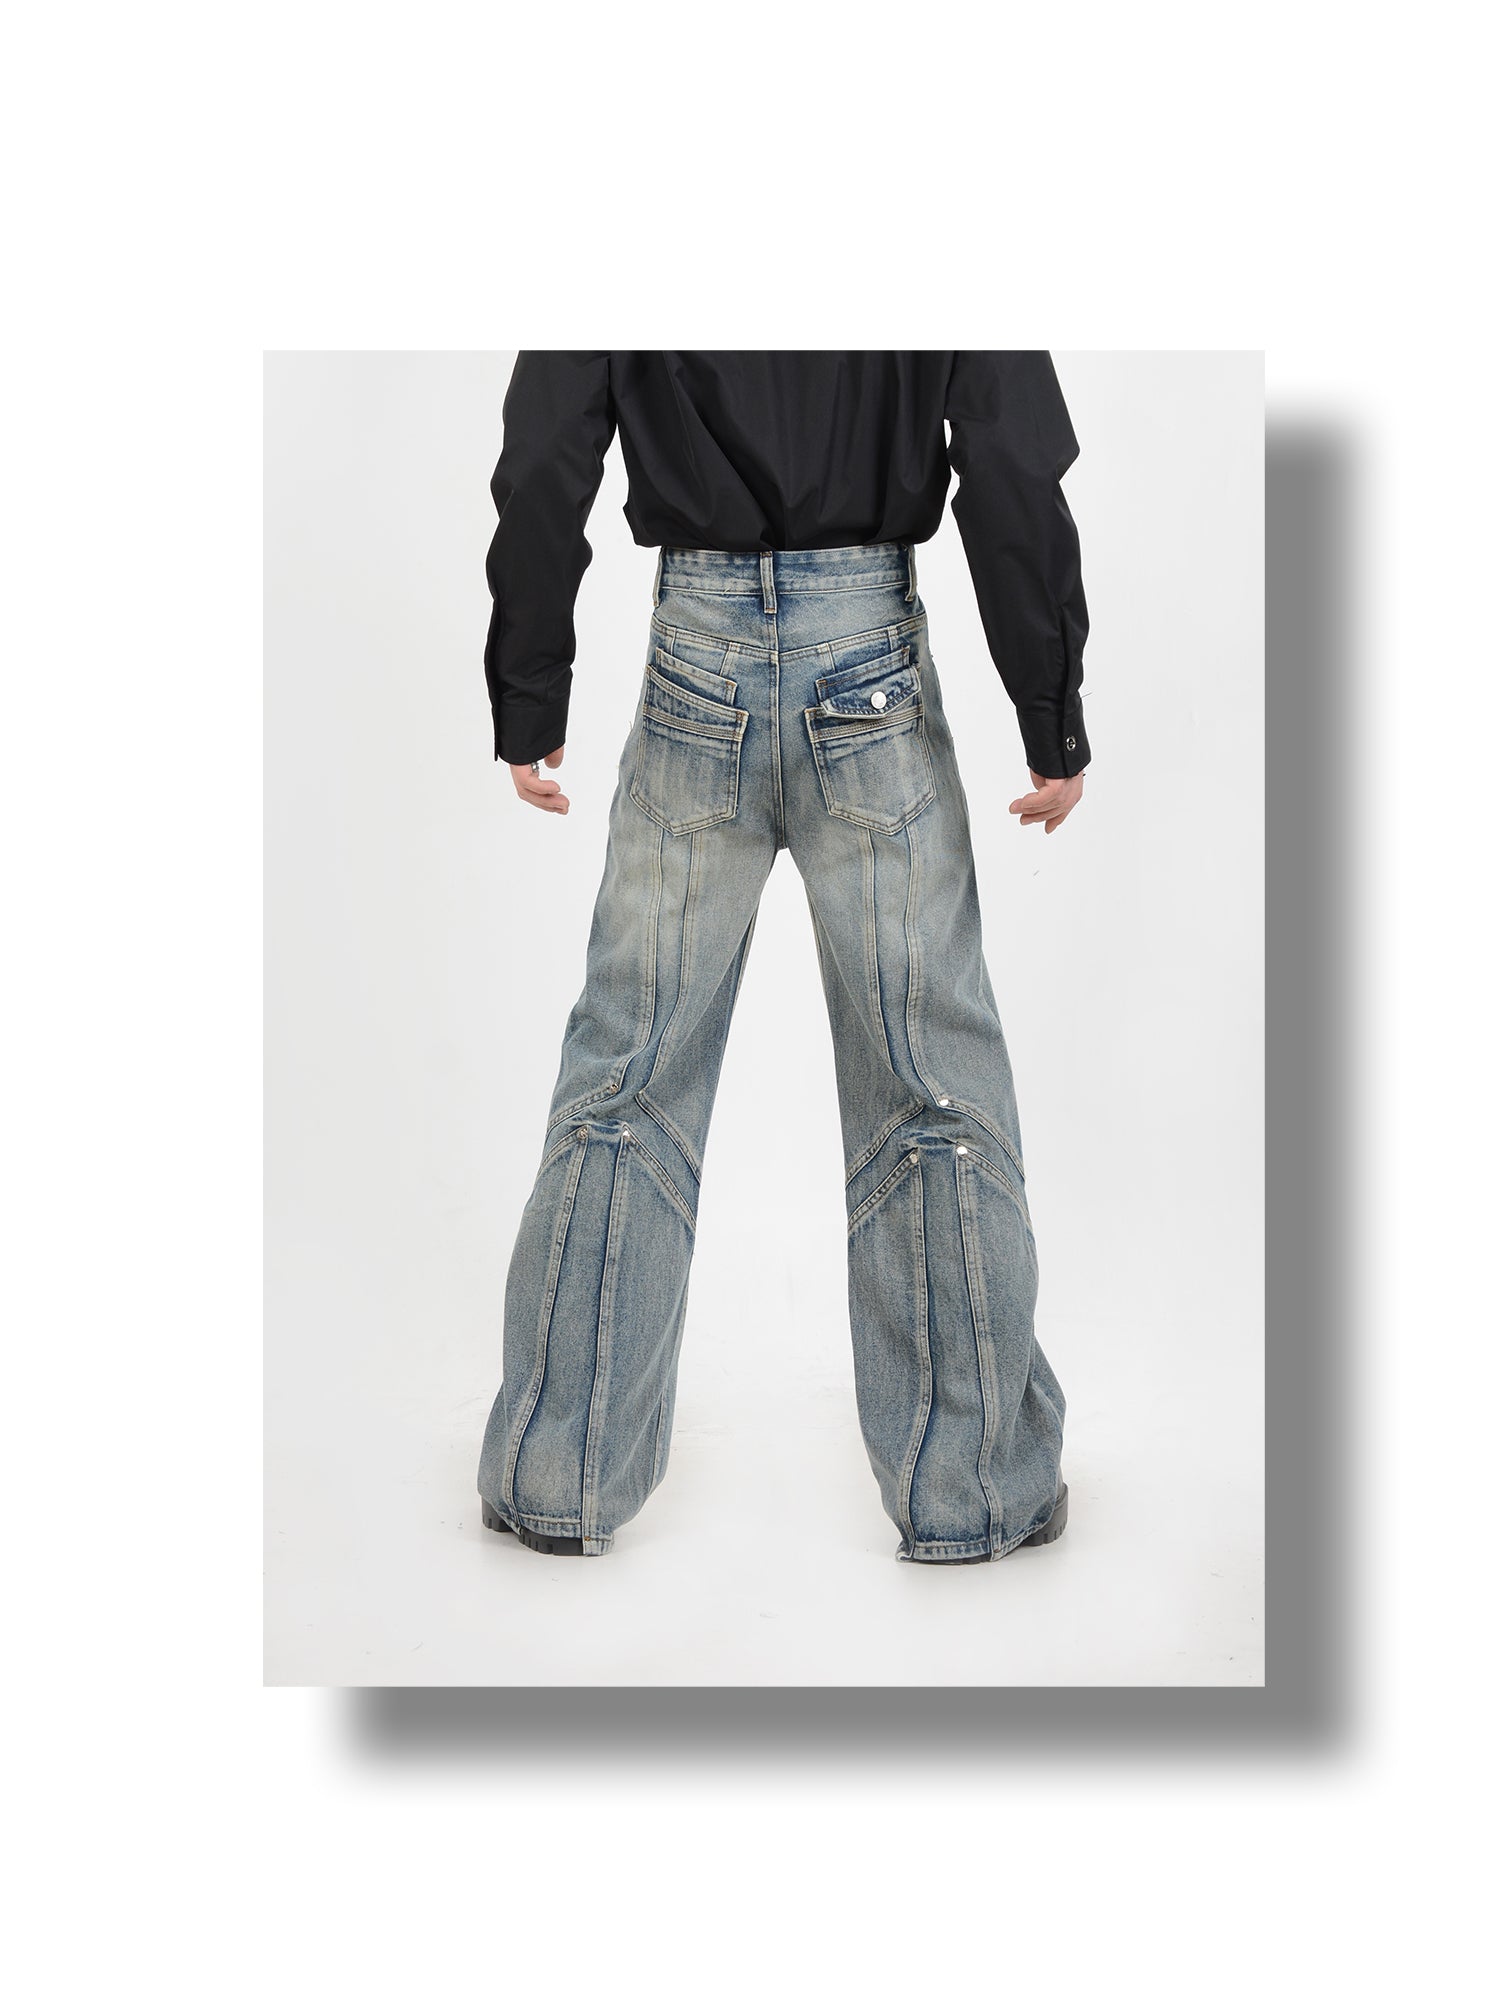 heavyweight deconstructed washed jeans